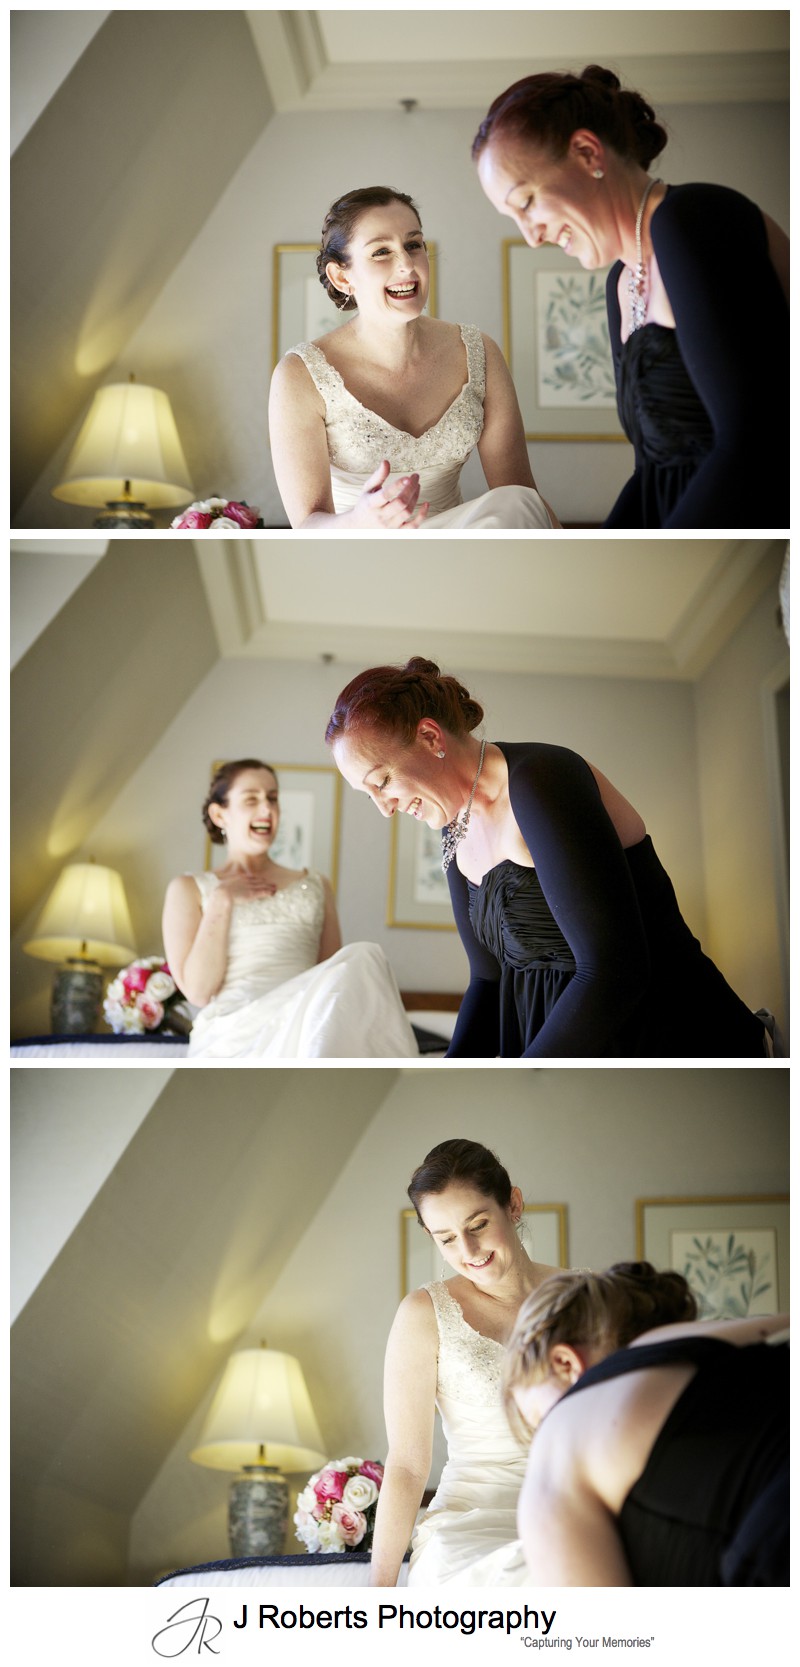 Bride laughing with her bridesmaids in preparation - sydney wedding photography